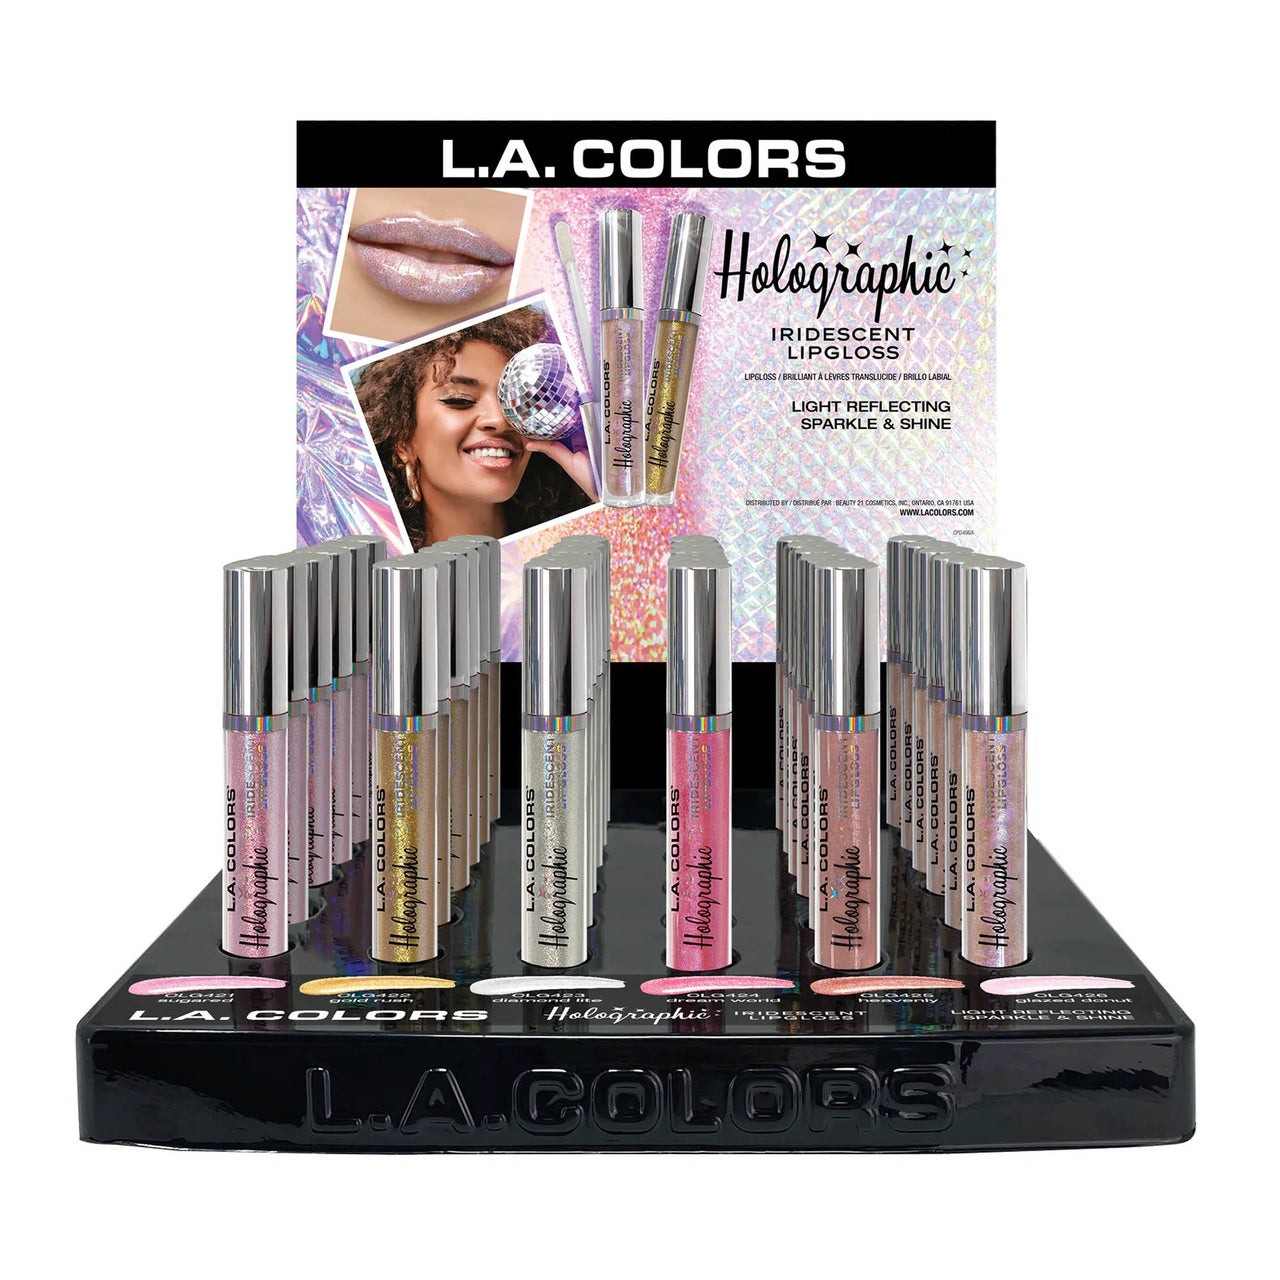 LAC-CLAC496 : Holographic Lipgloss Promo Display 36 PC